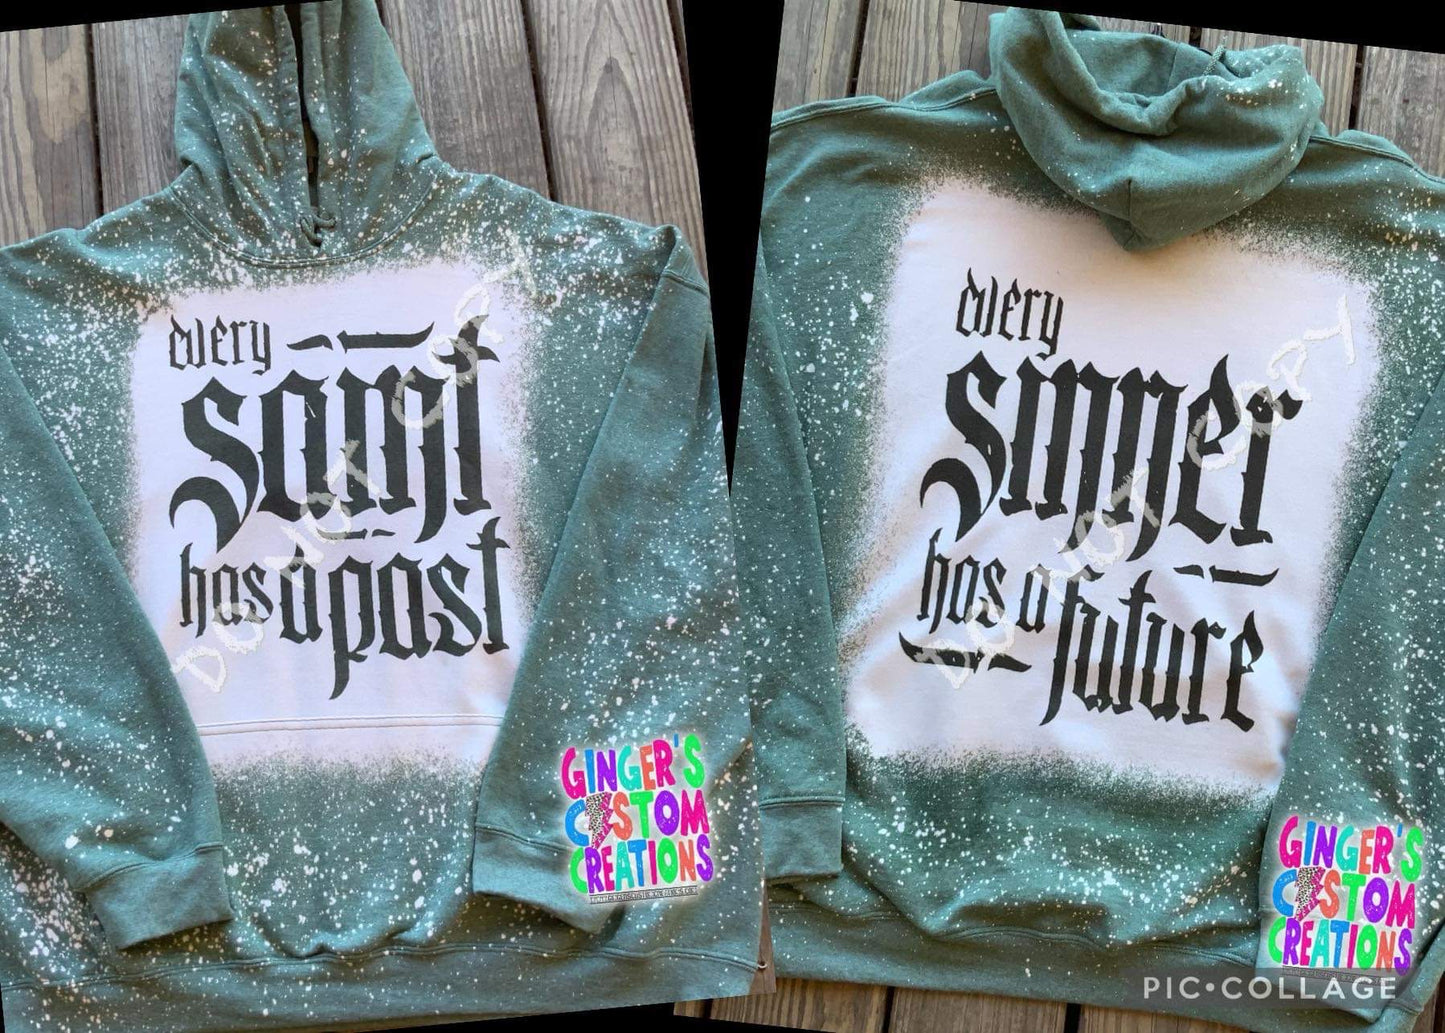 EVERY SINNER HAS A PAST/FUTURE DOUBLE SIDED HOODIE